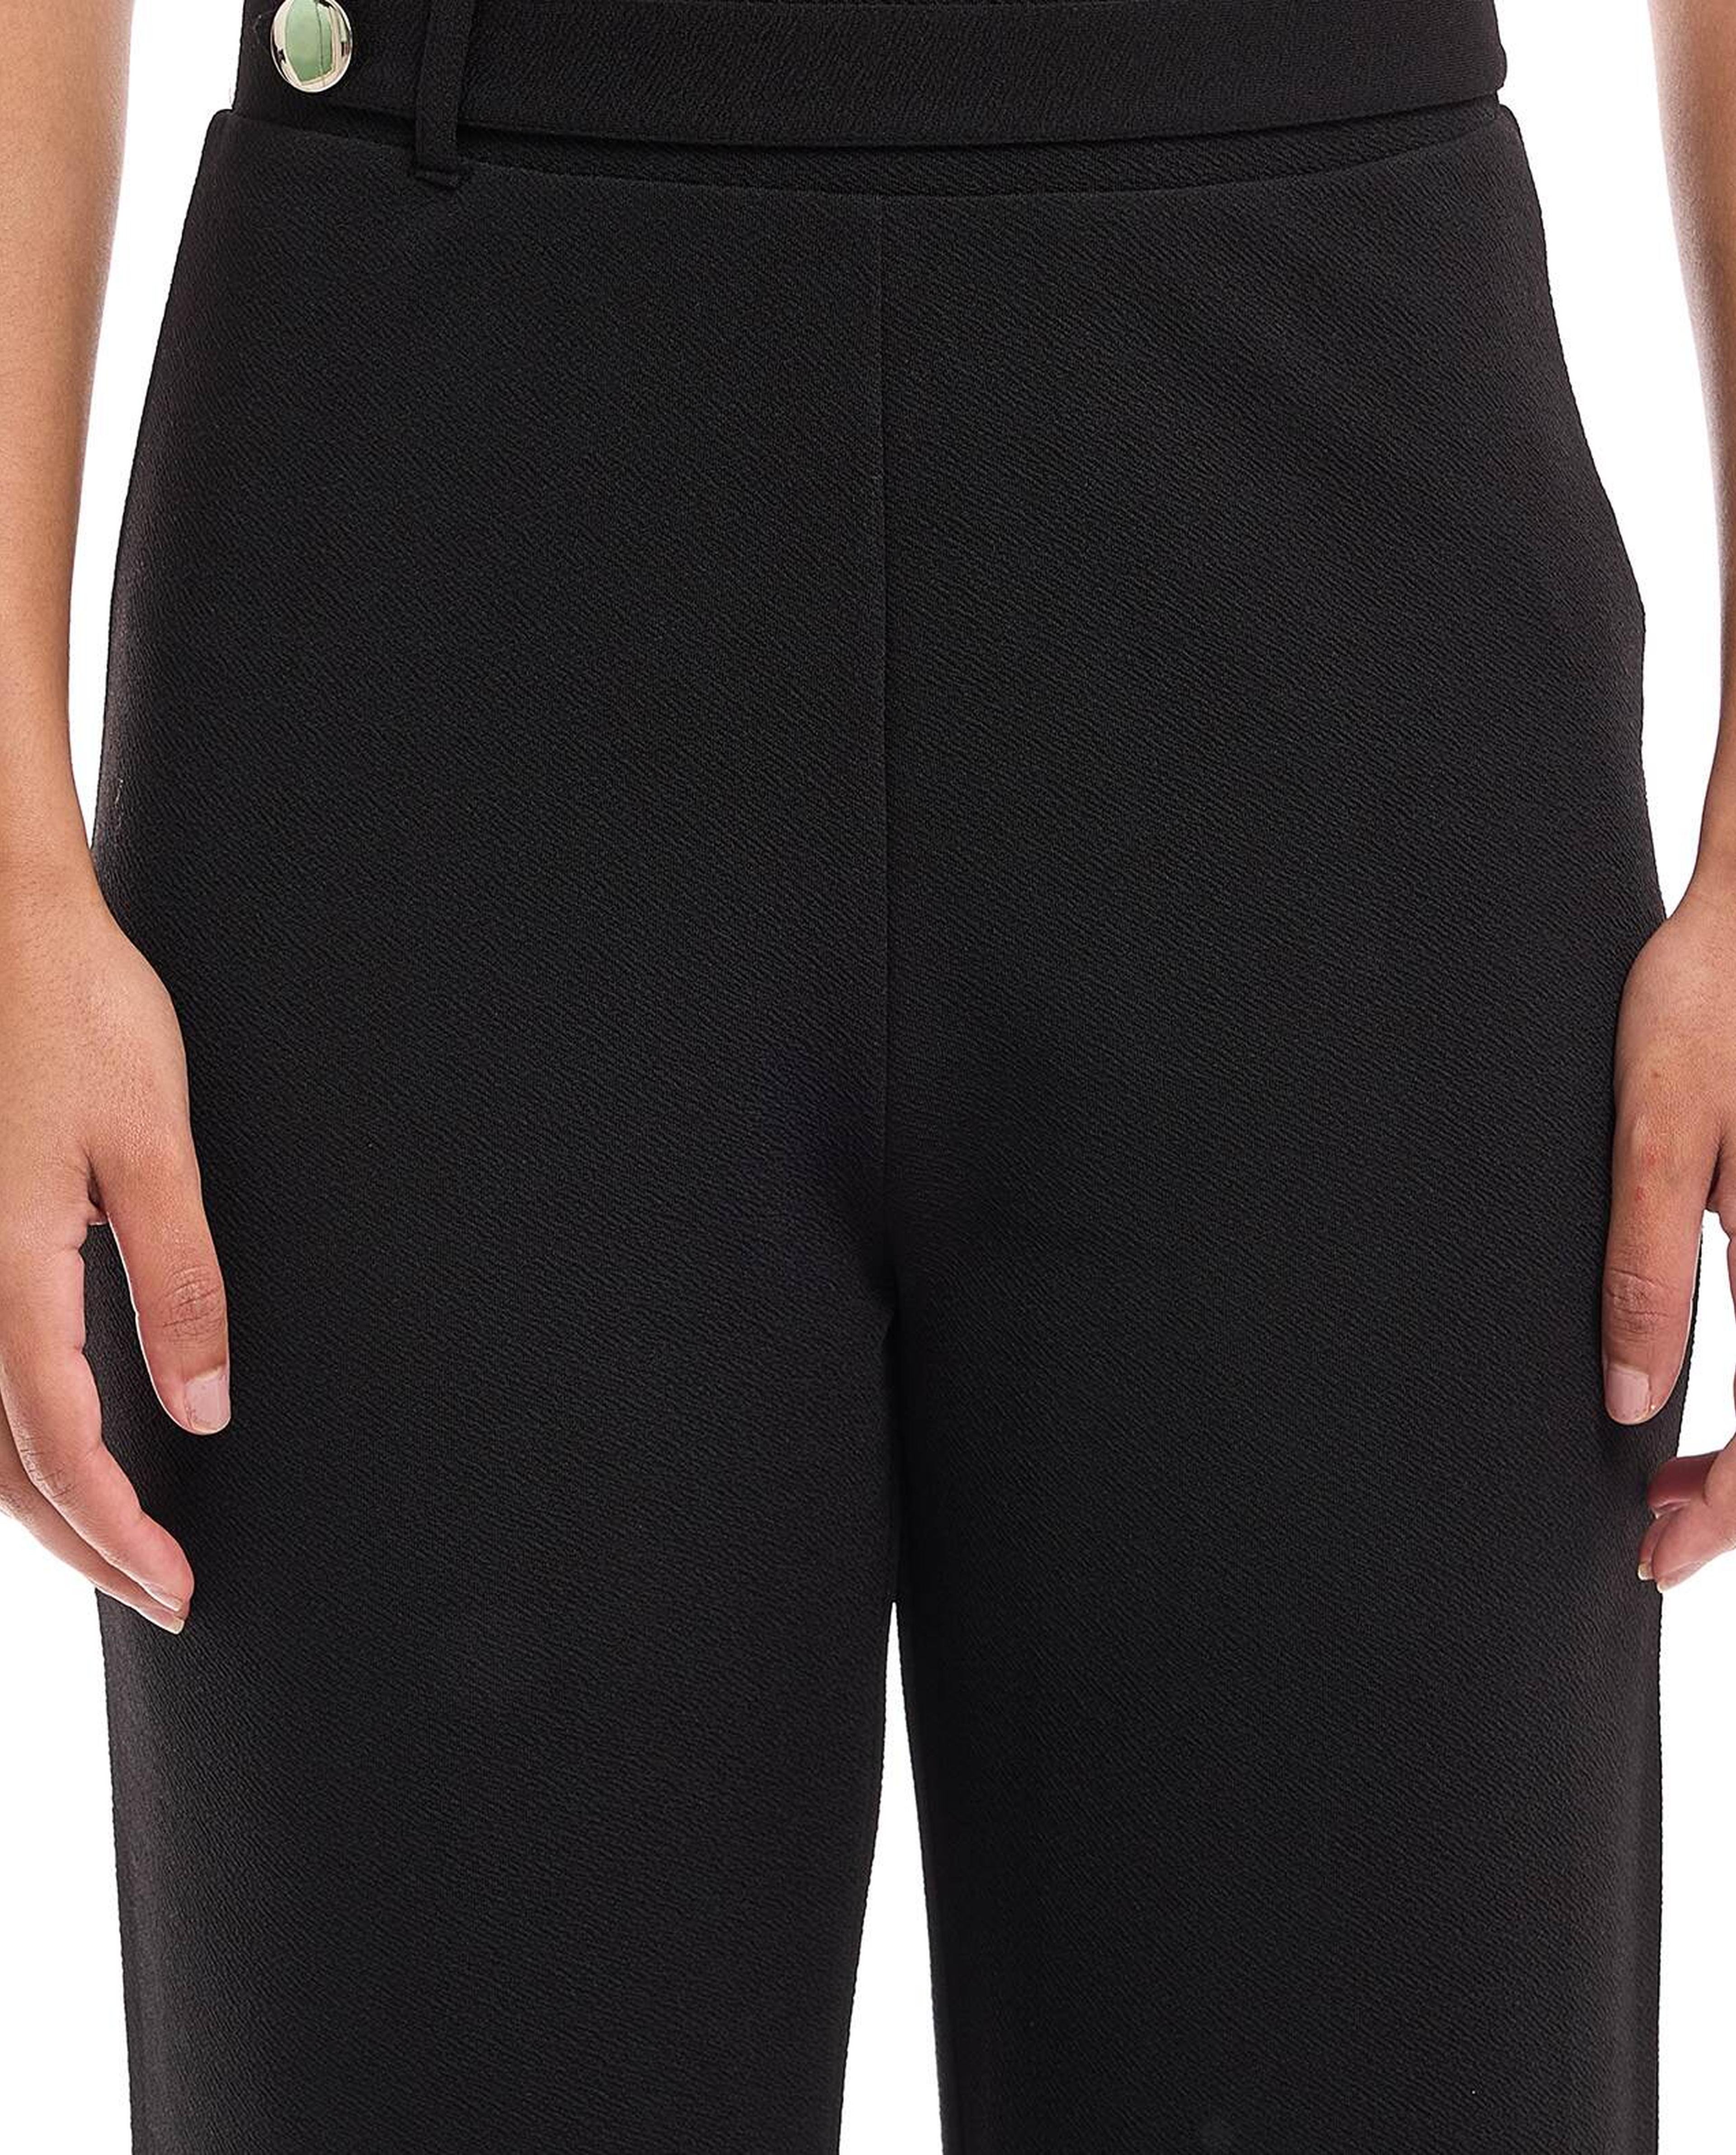 Textured Pants with Elastic Waist